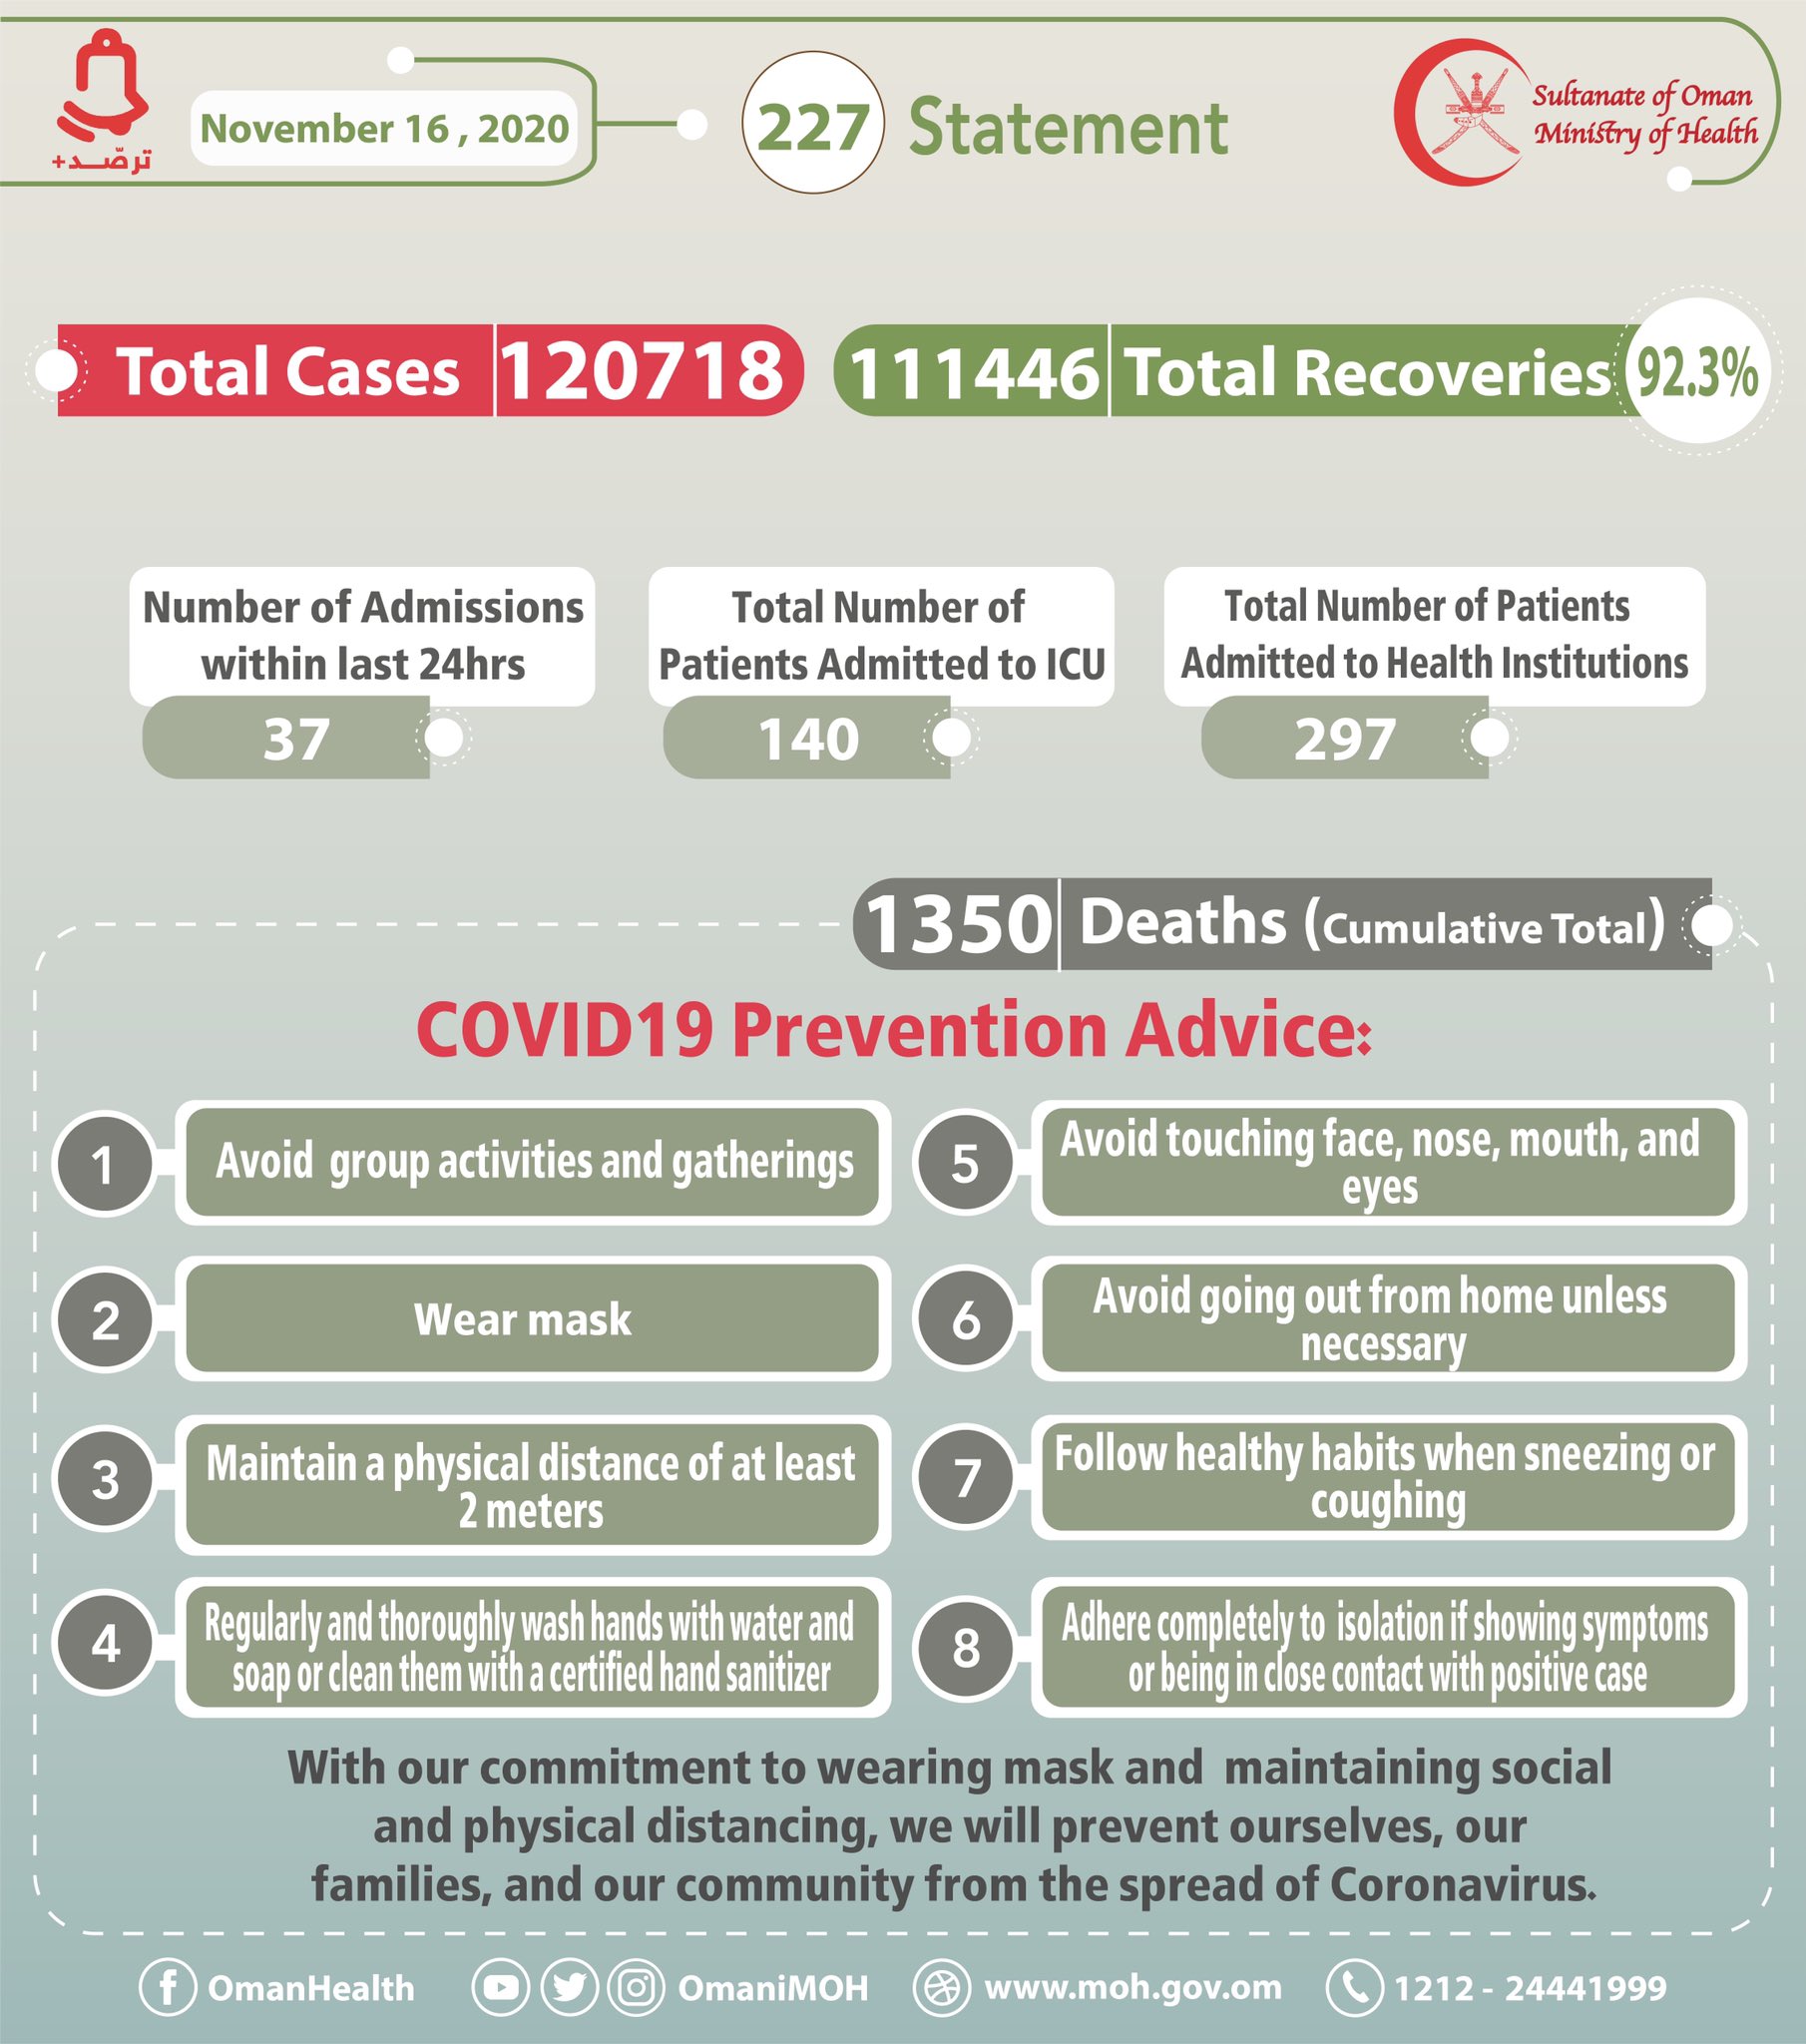 329 New Corona Cases In Oman, Total Cases Reached To 120,718